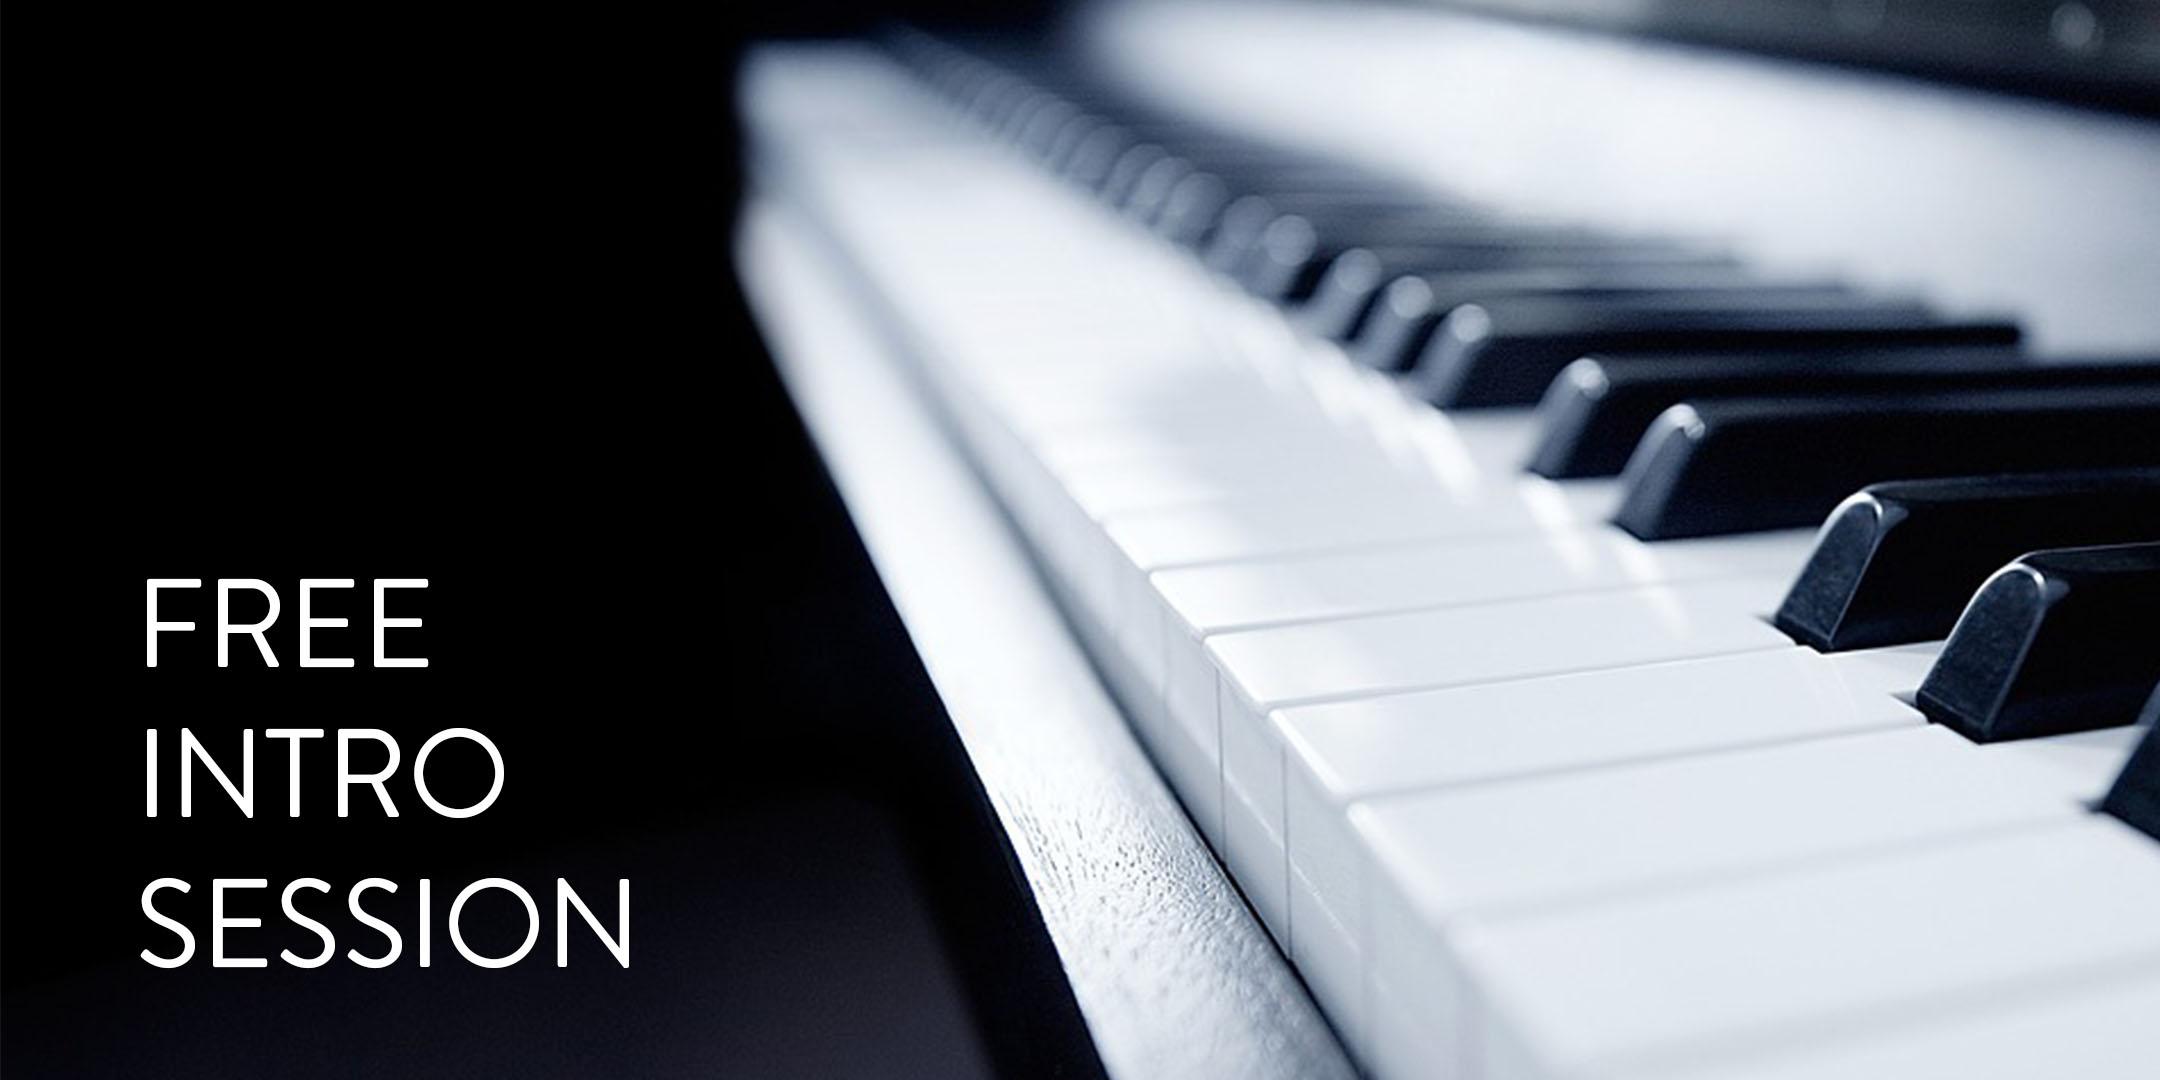 FREE Introductory Piano Session